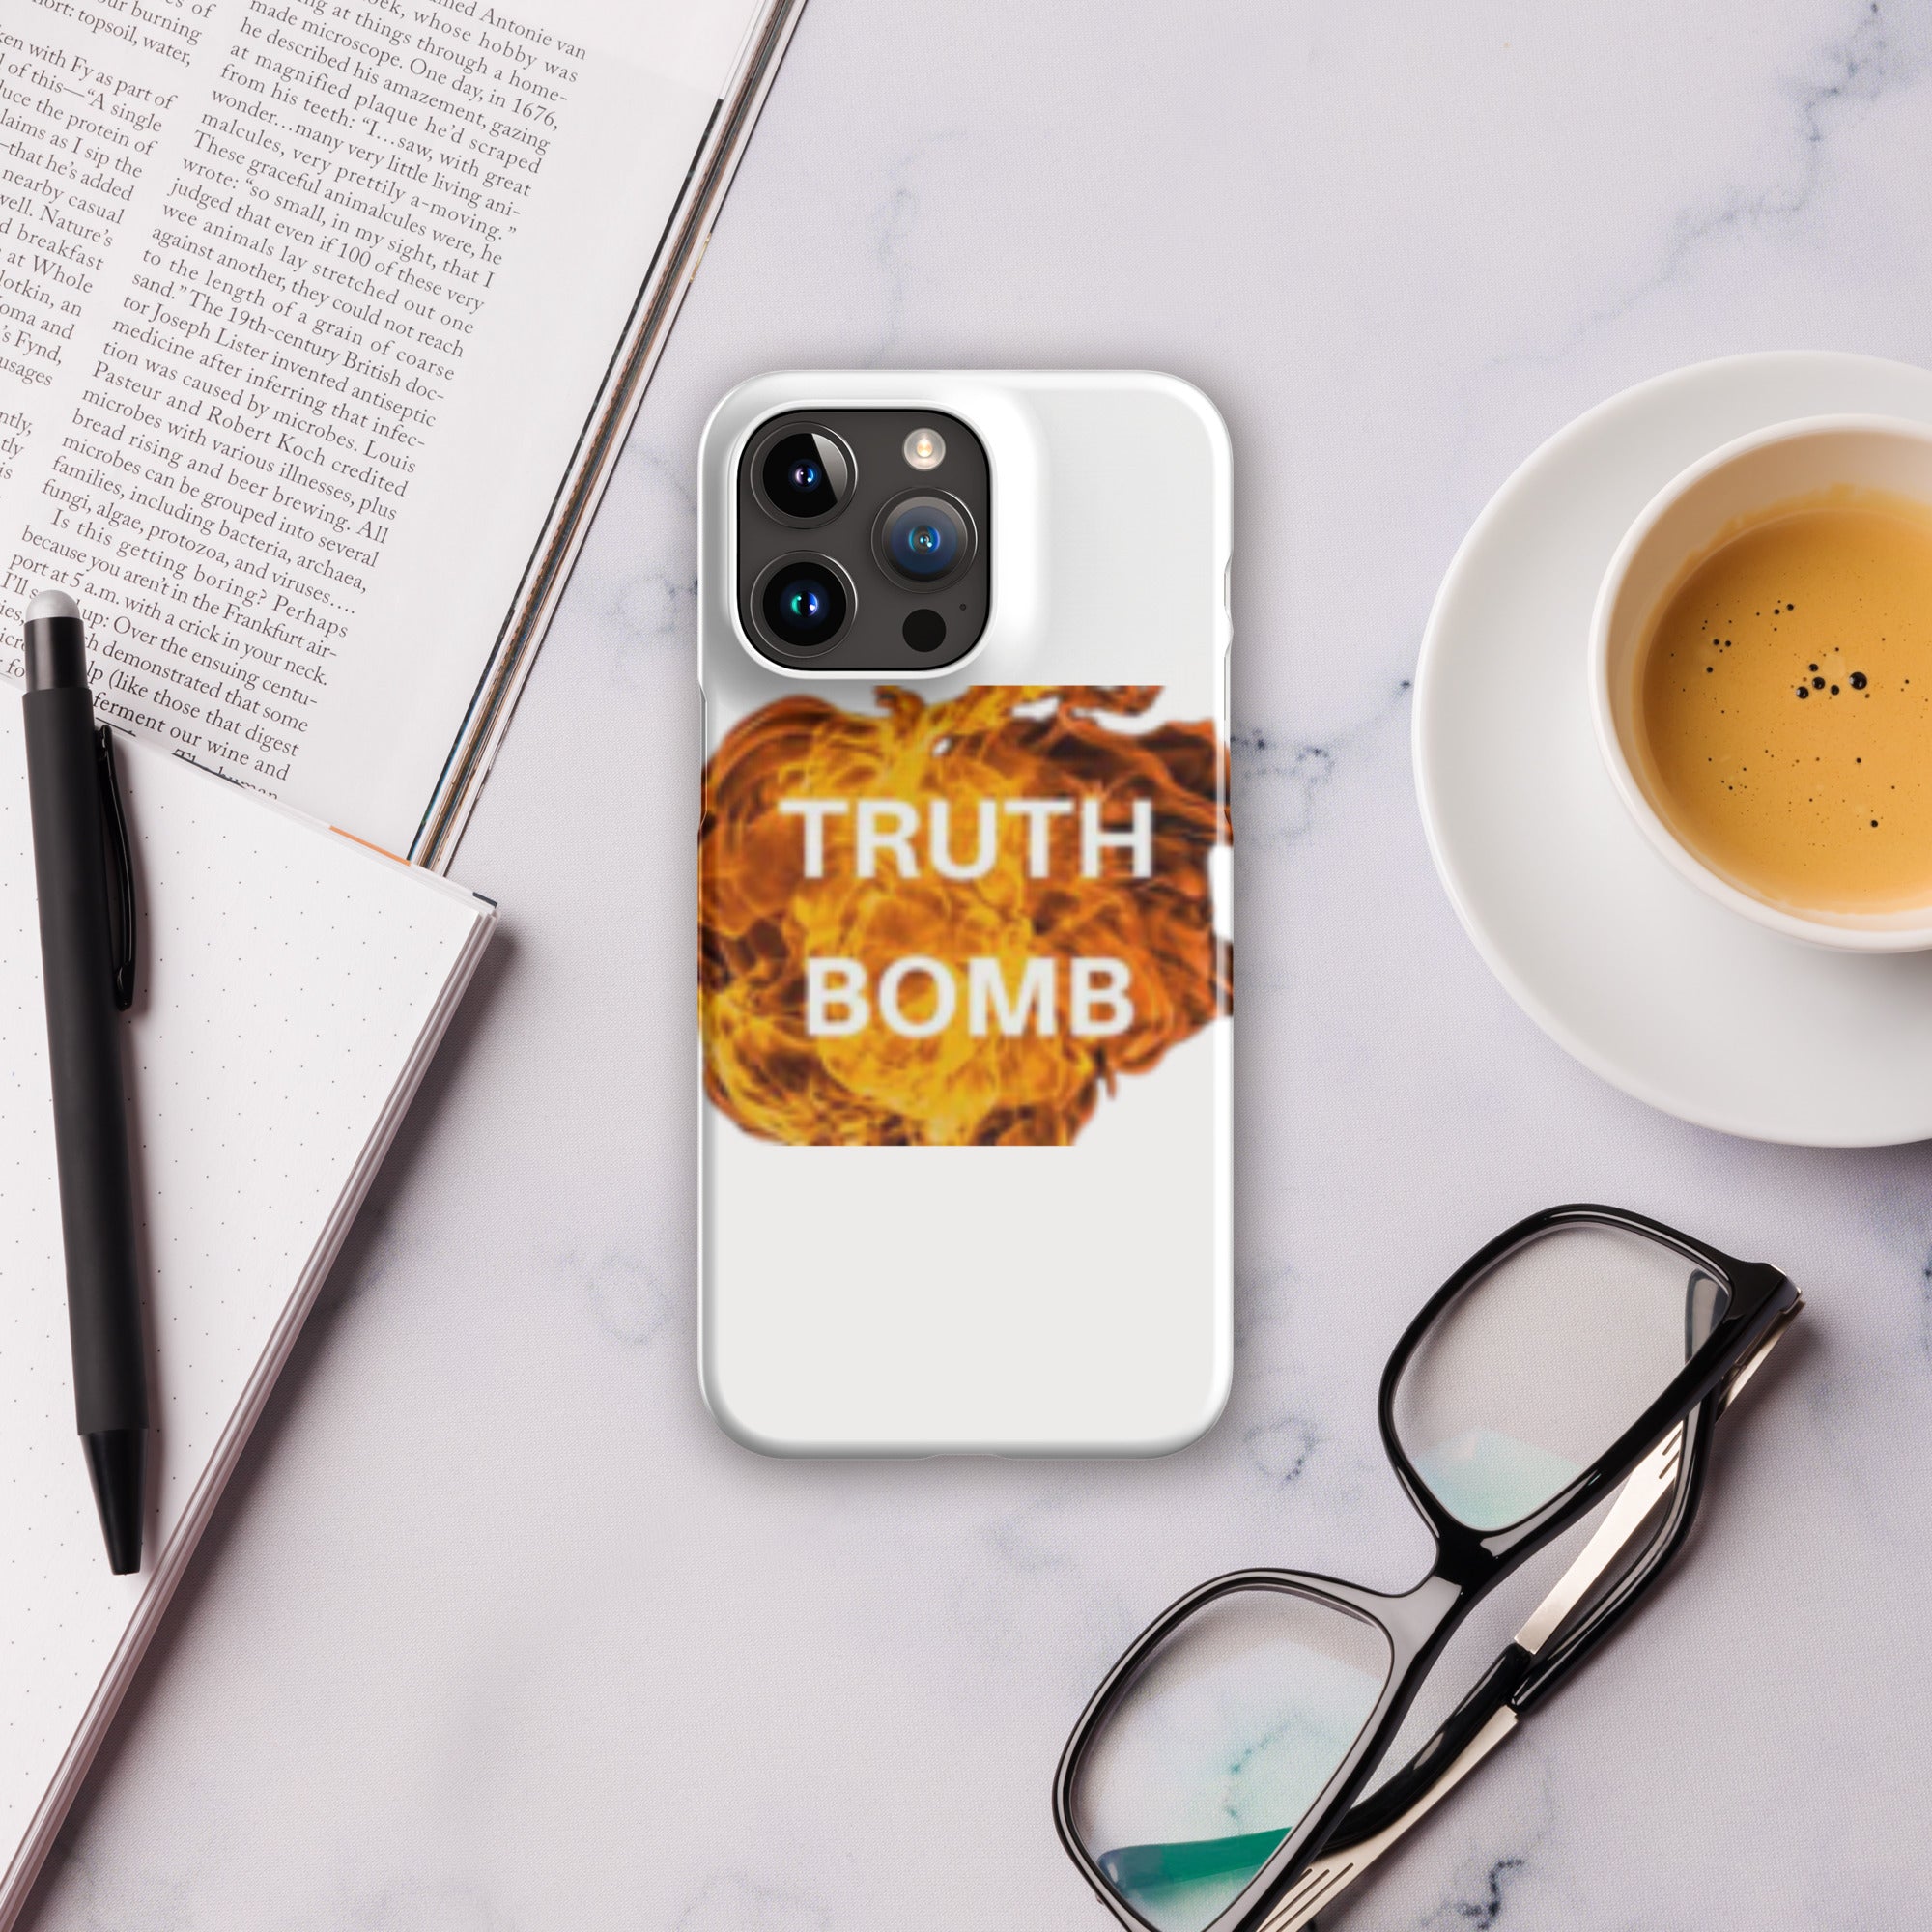 Buy Truth Bomb Snap Case for iPhone - Sleek Protection